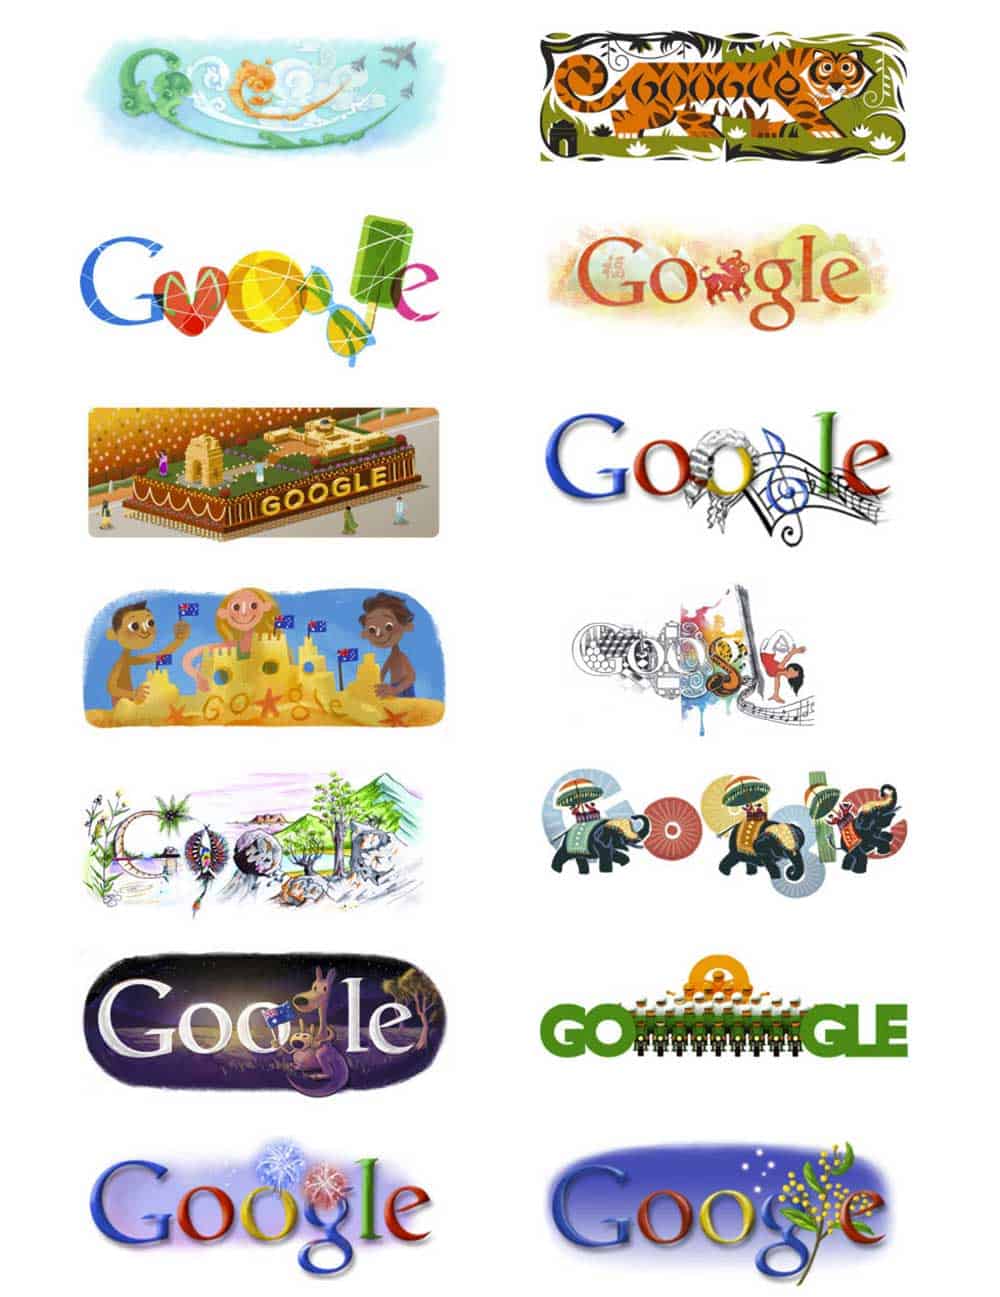 First Google Logo - Google Logo Design History - How it's Changed Over 20 Years